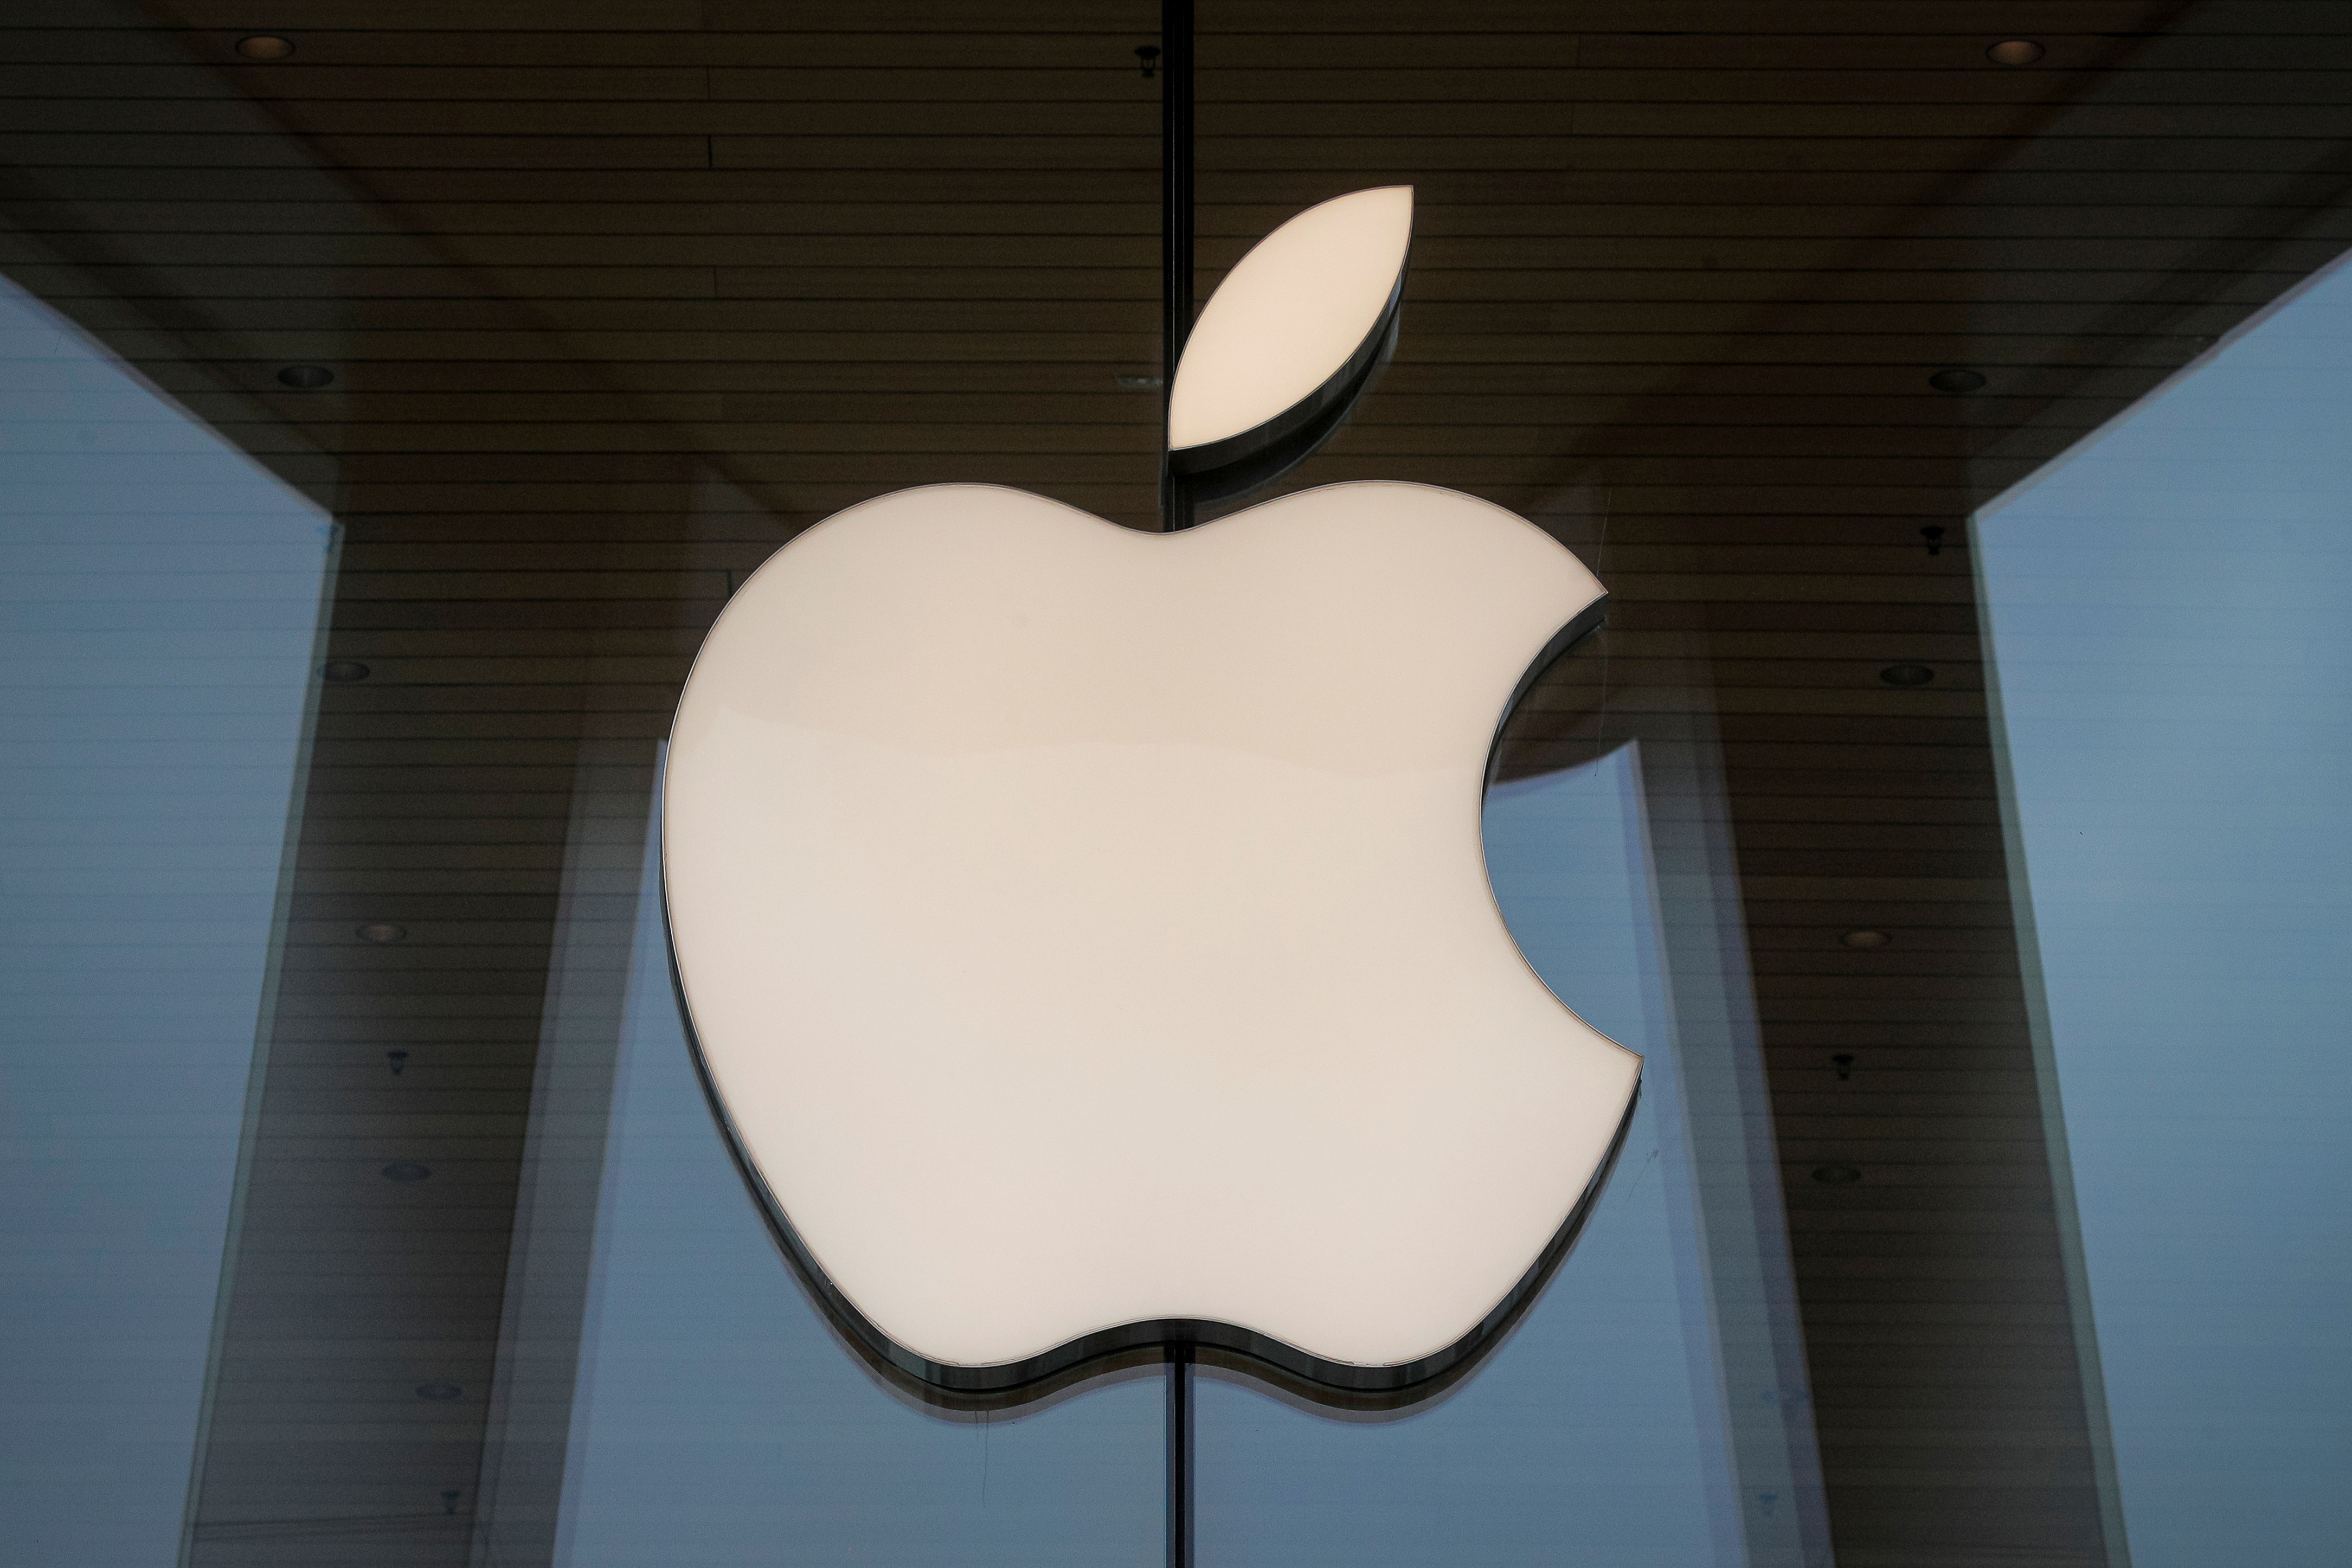 The Apple logo is seen at an Apple Store, as Apple's new 5G iPhone 12 went on sale in Brooklyn, New York, U.S. October 23, 2020.  REUTERS/Brendan McDermid/File Photo